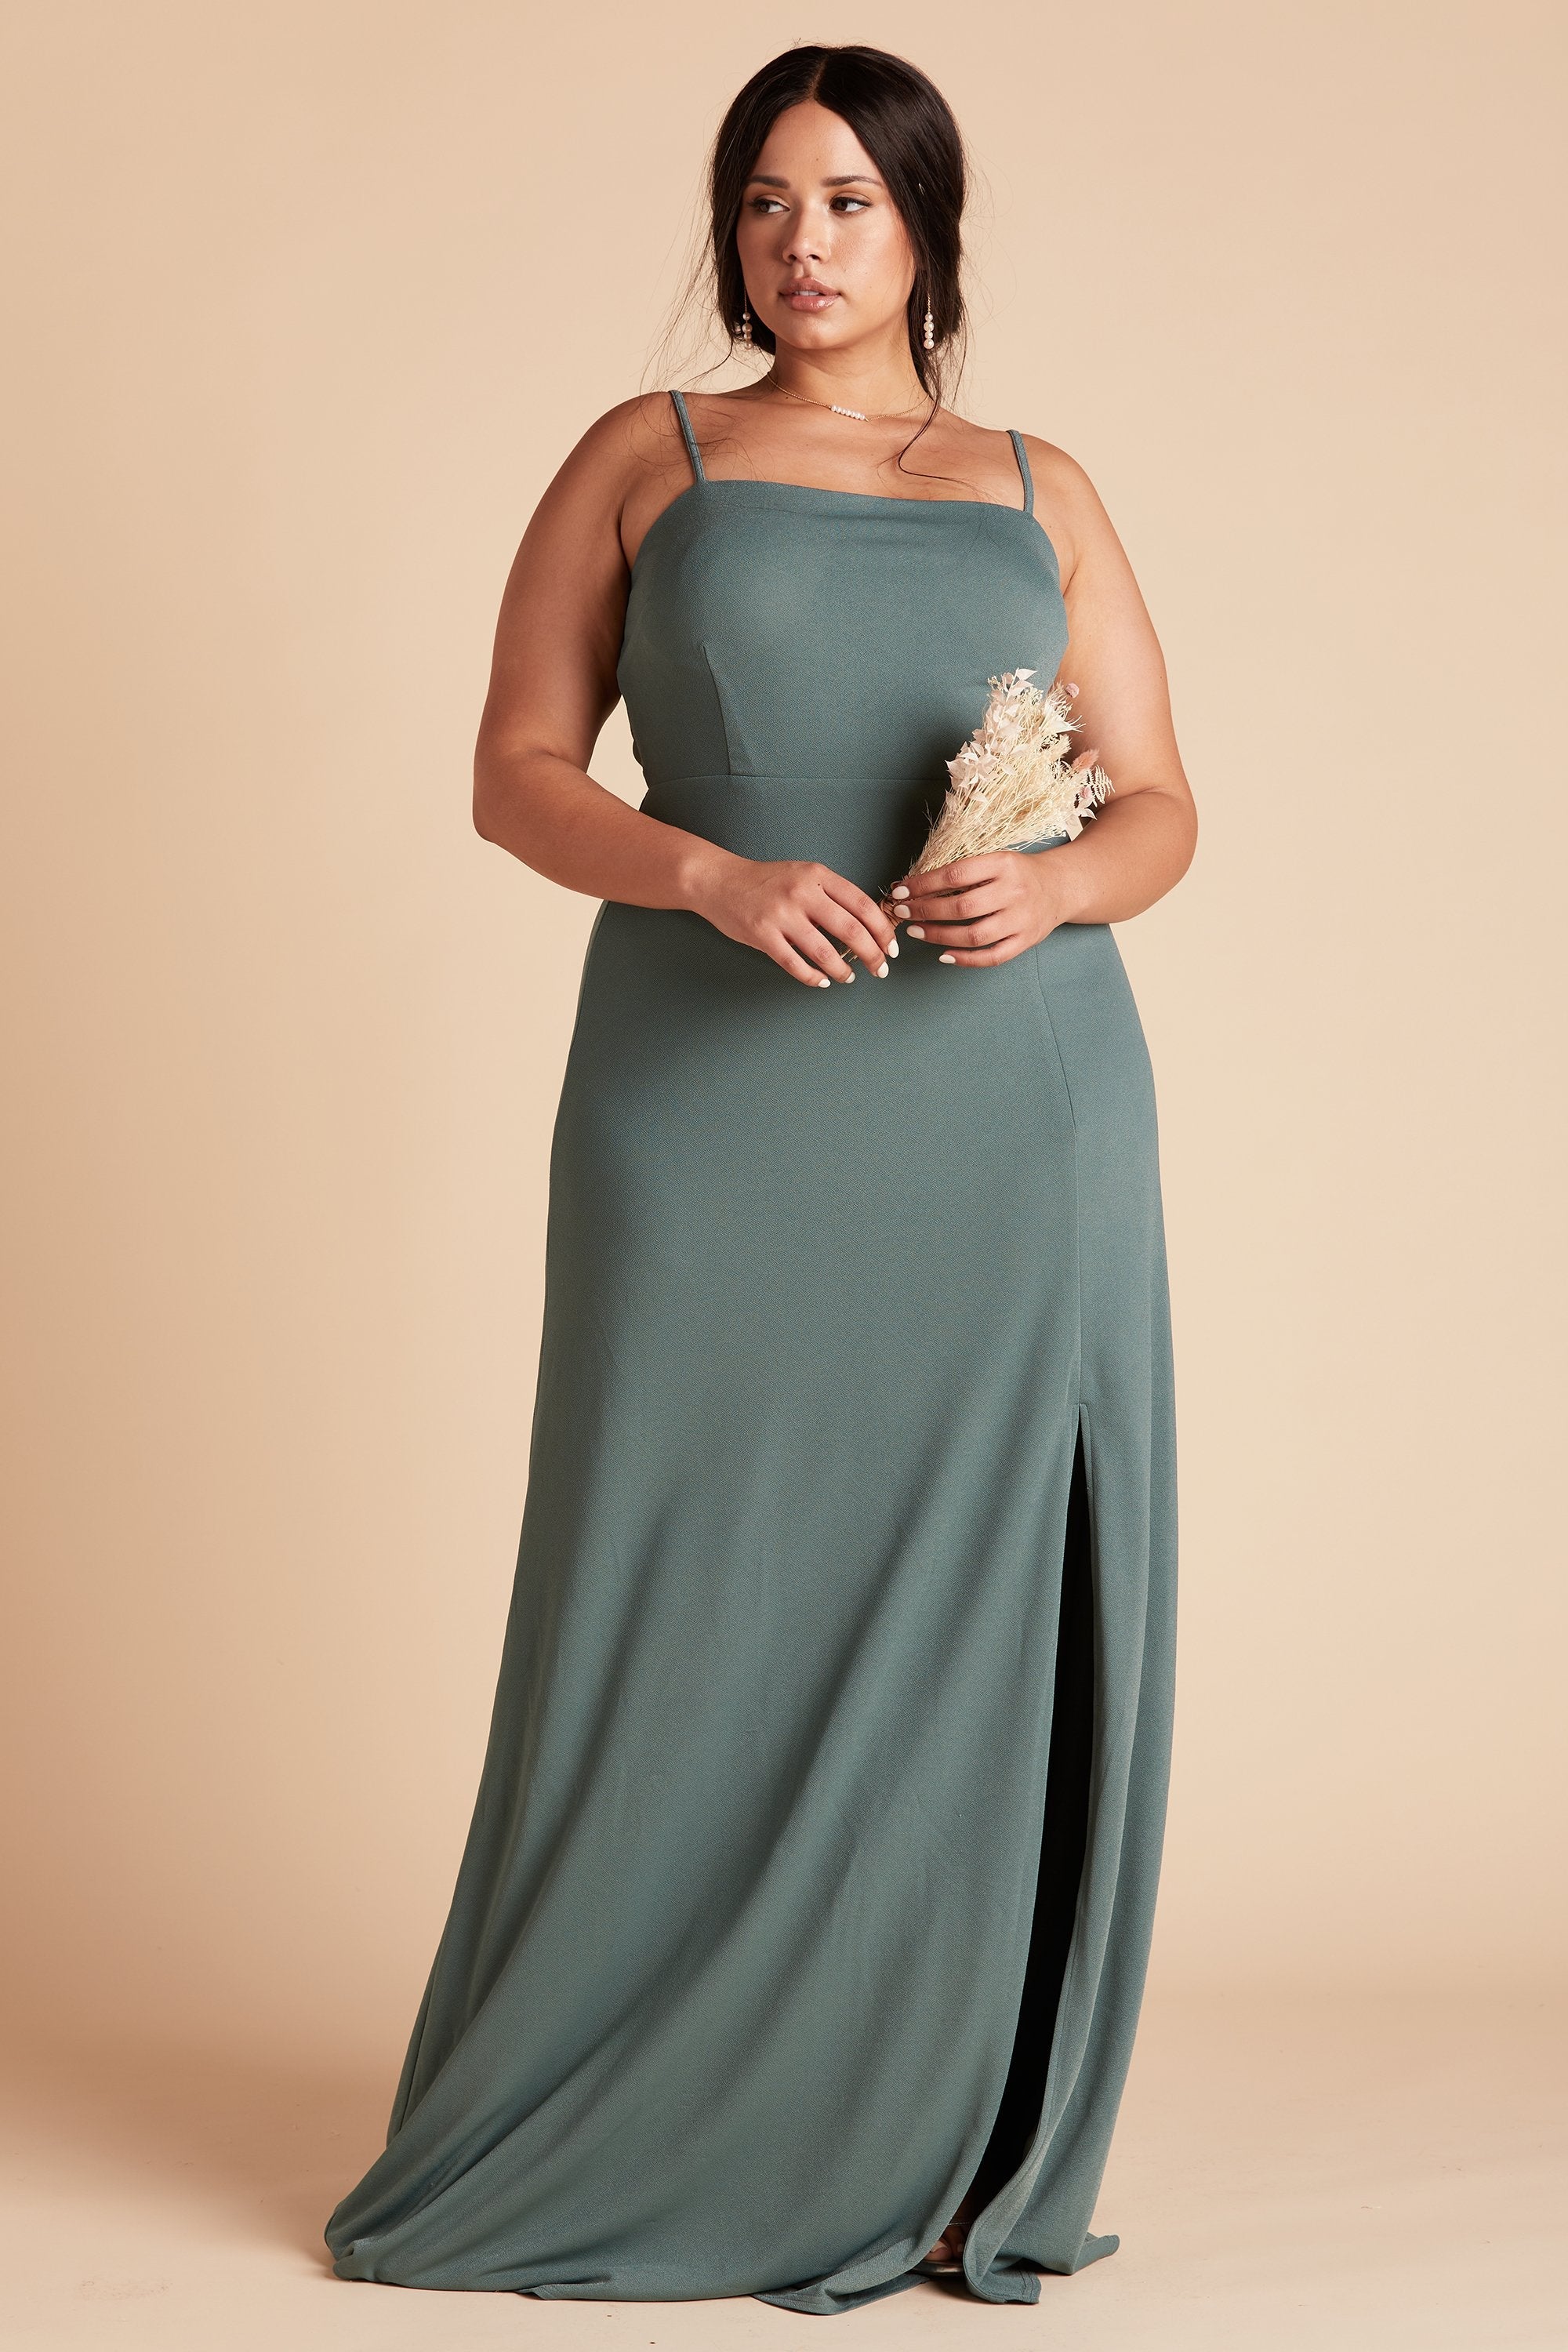 Benny plus size bridesmaid dress with slit in sea glass green chiffon by Birdy Grey, front view